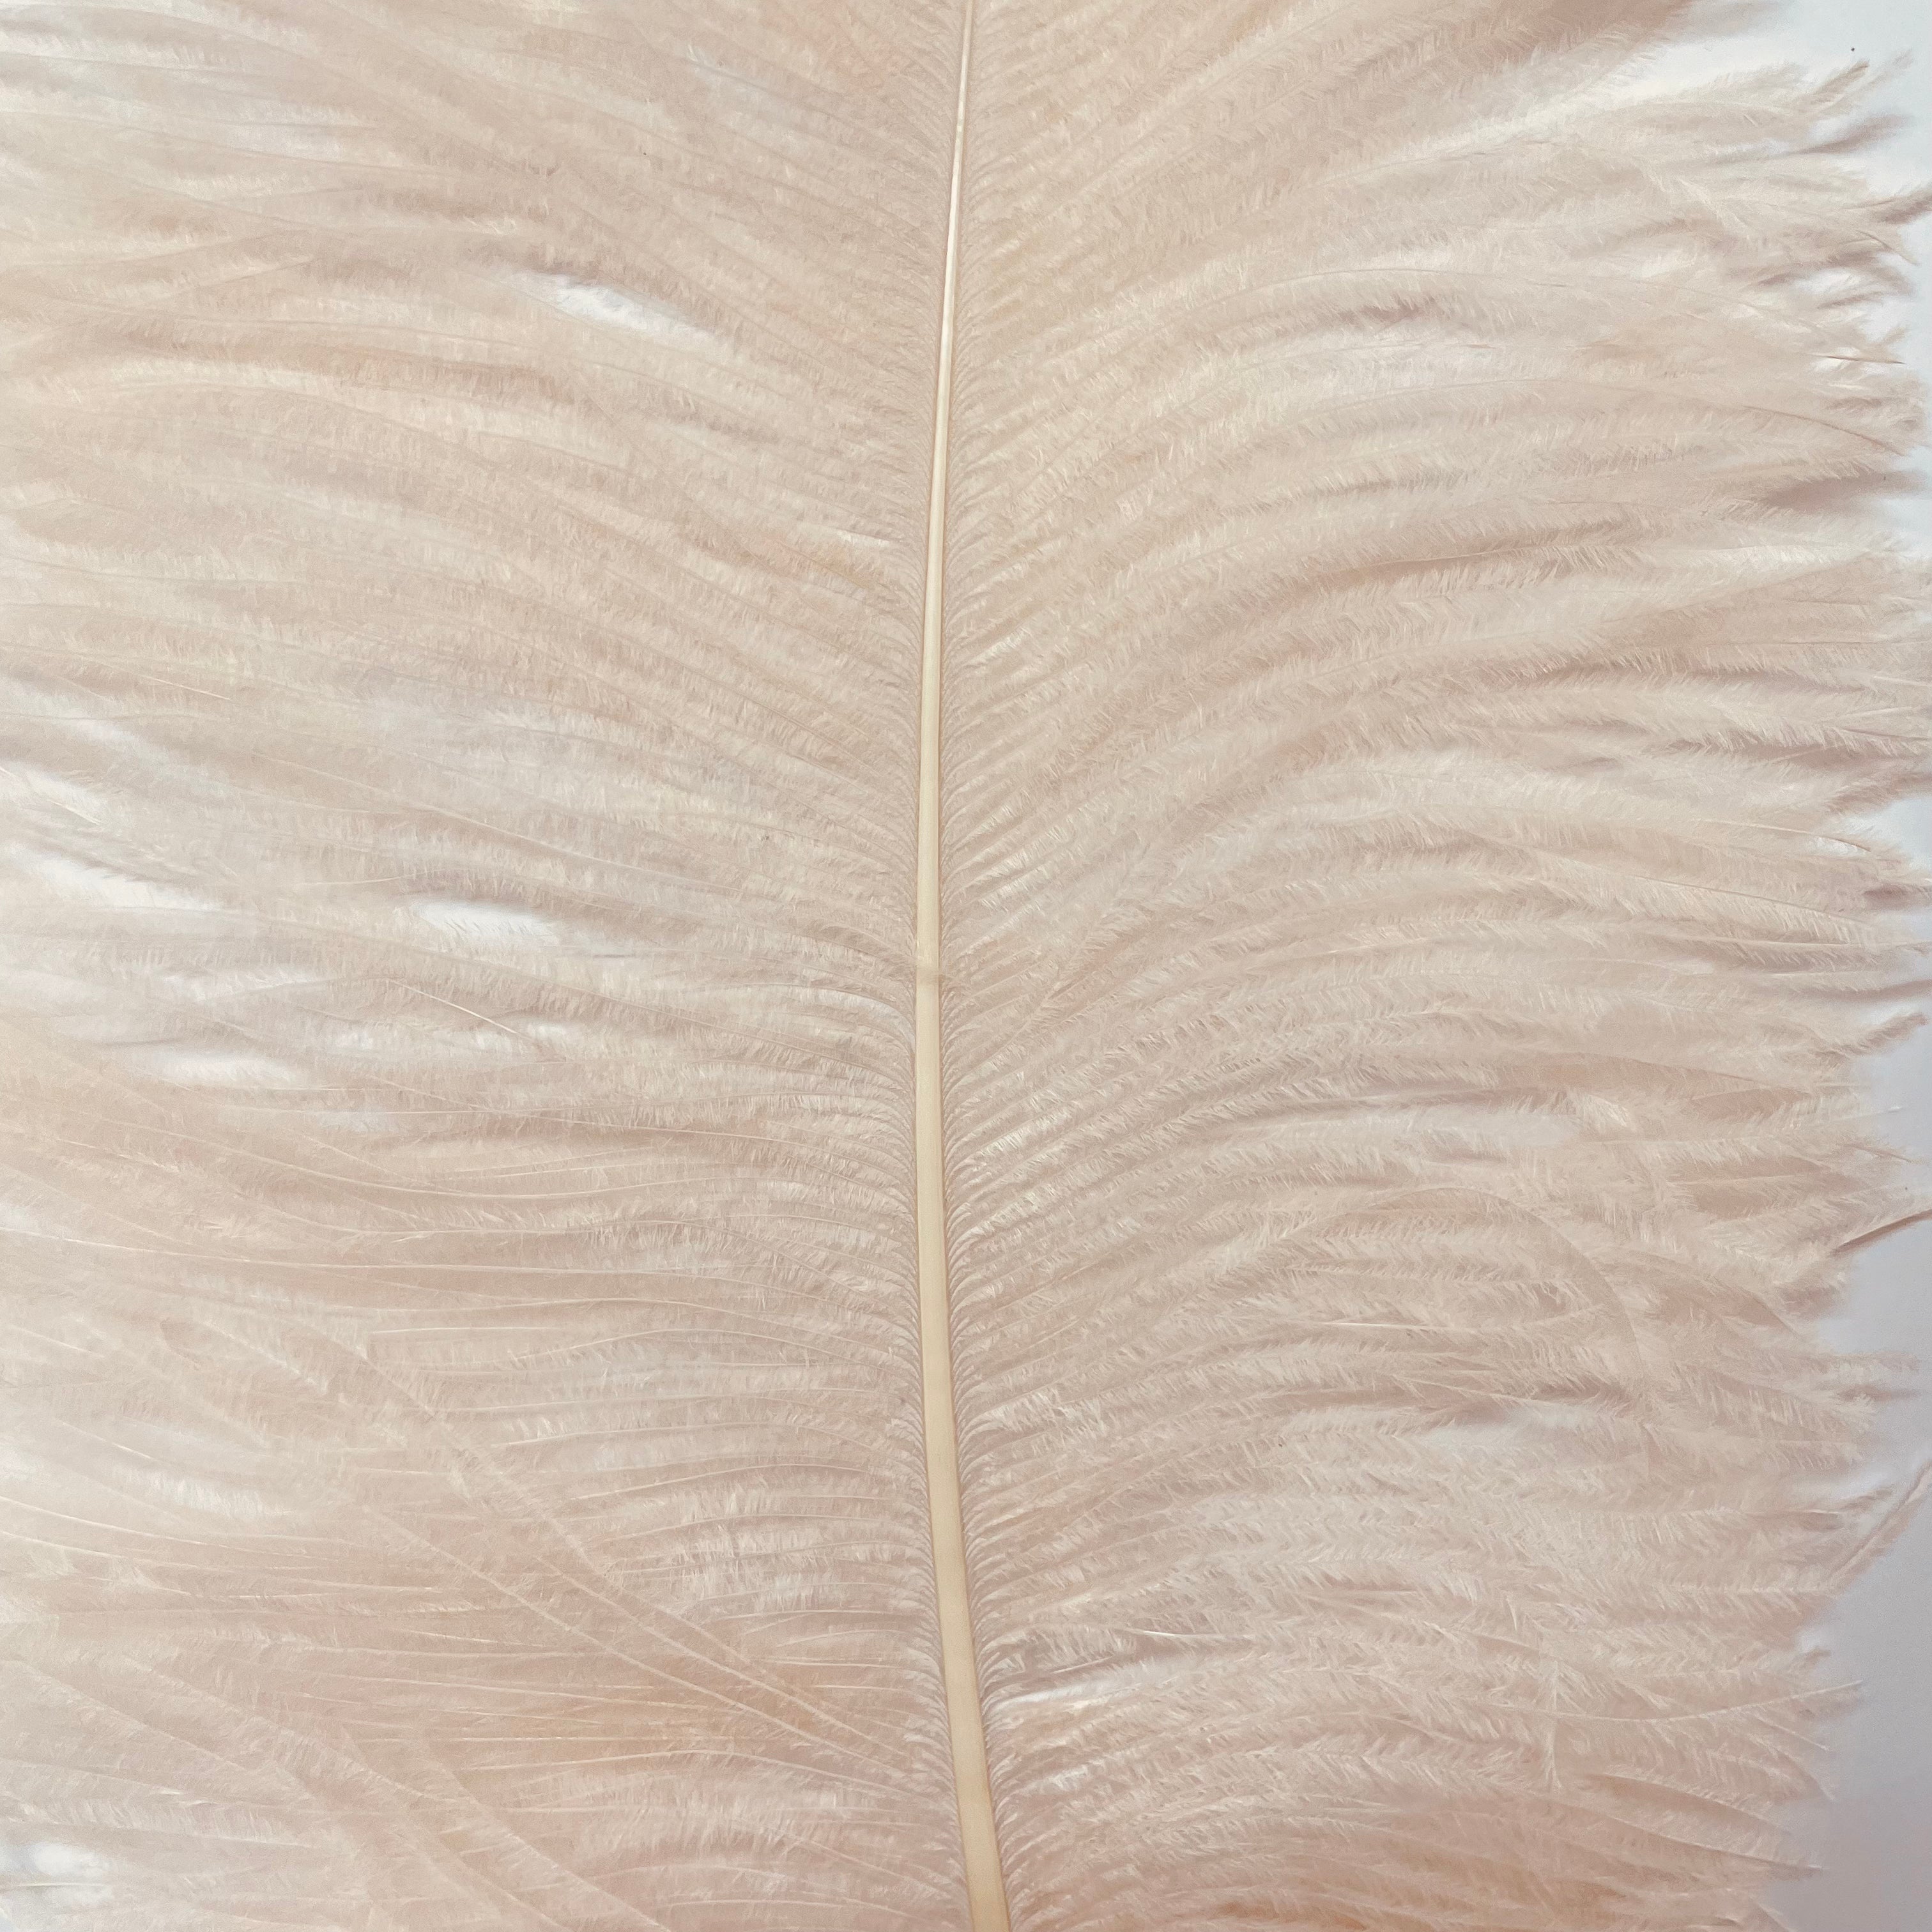 Ostrich Wing Feather Plumes 50-55cm (20-22") - Champagne